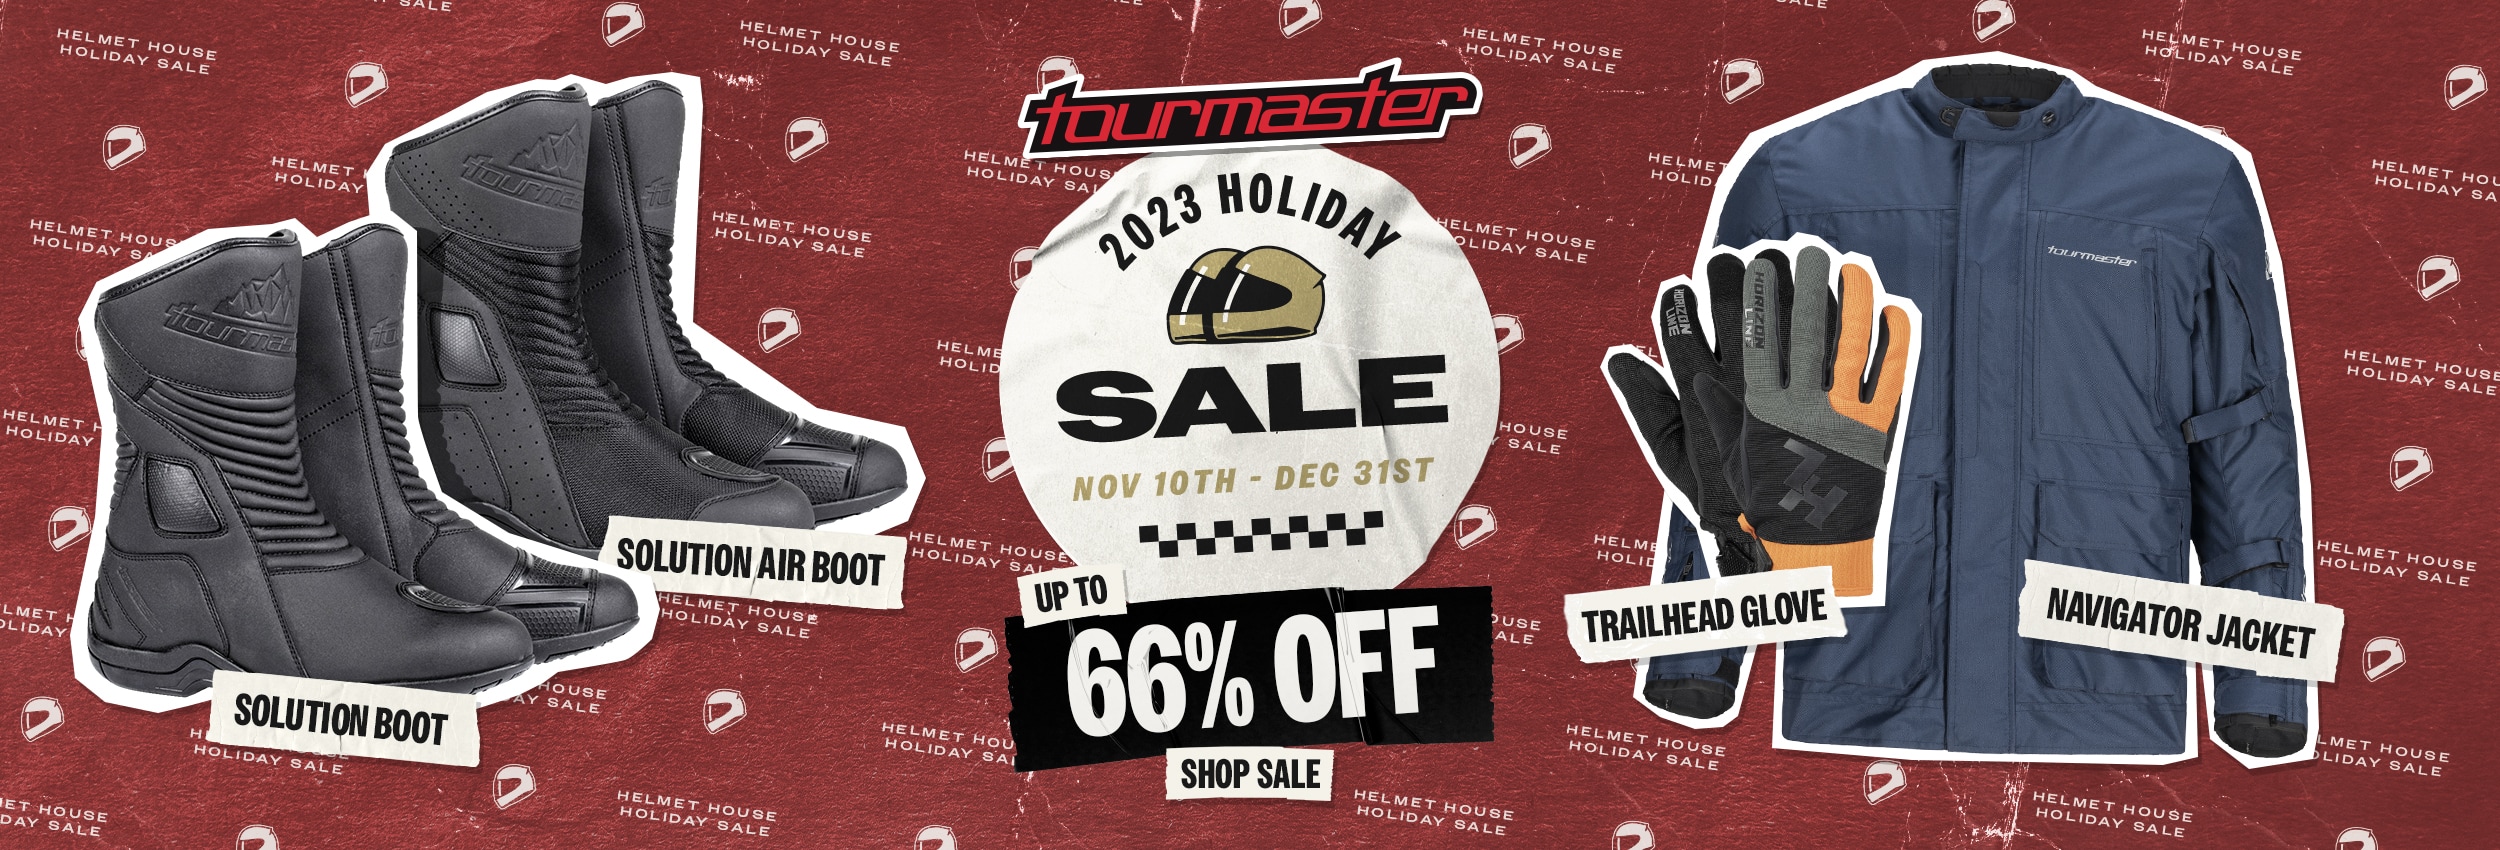 Tourmaster Holiday Sale